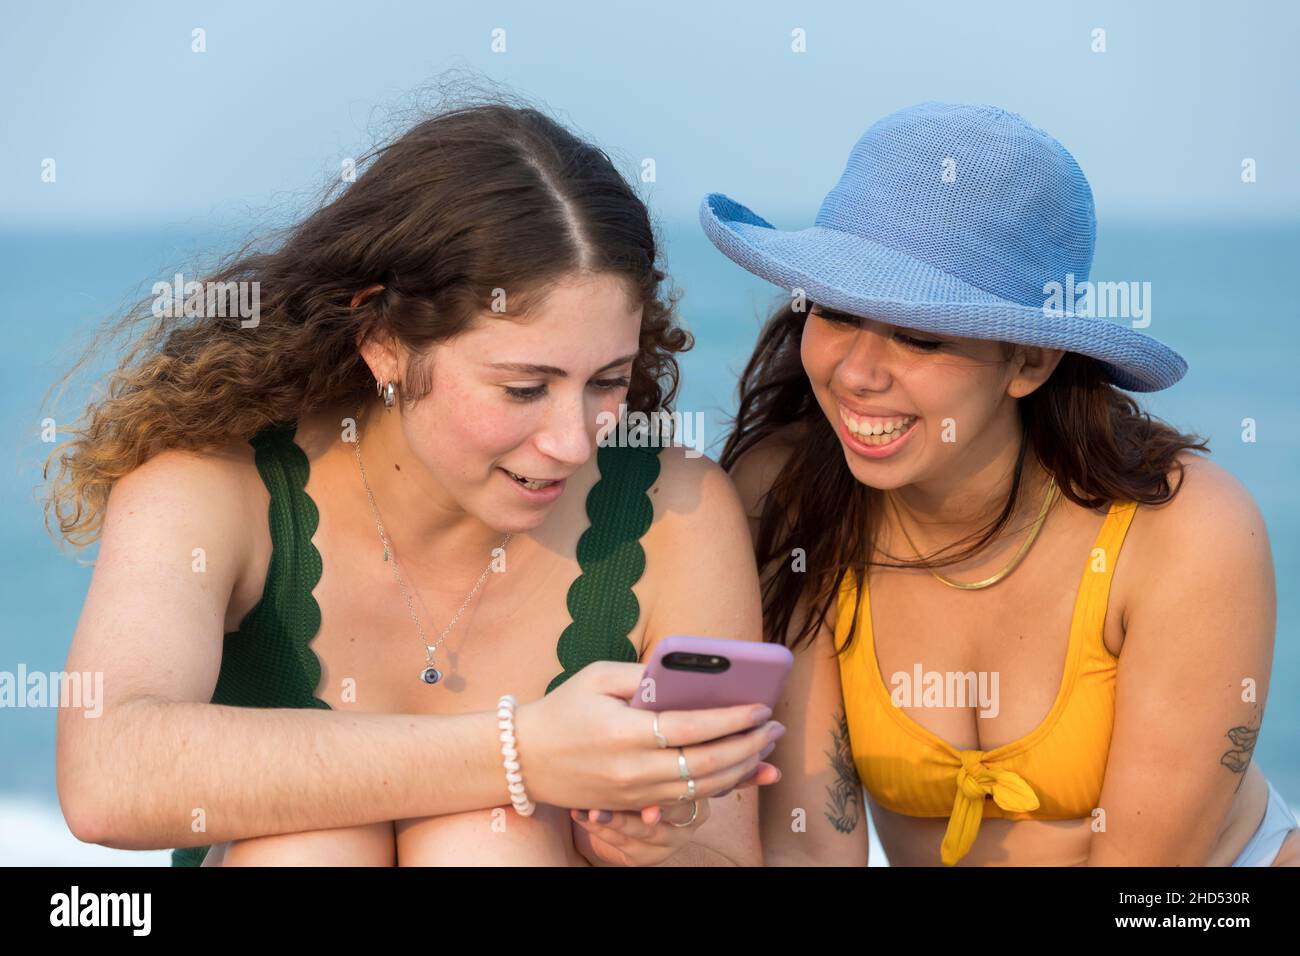 Two young women at the beach looking at cell phone. Stock Photo